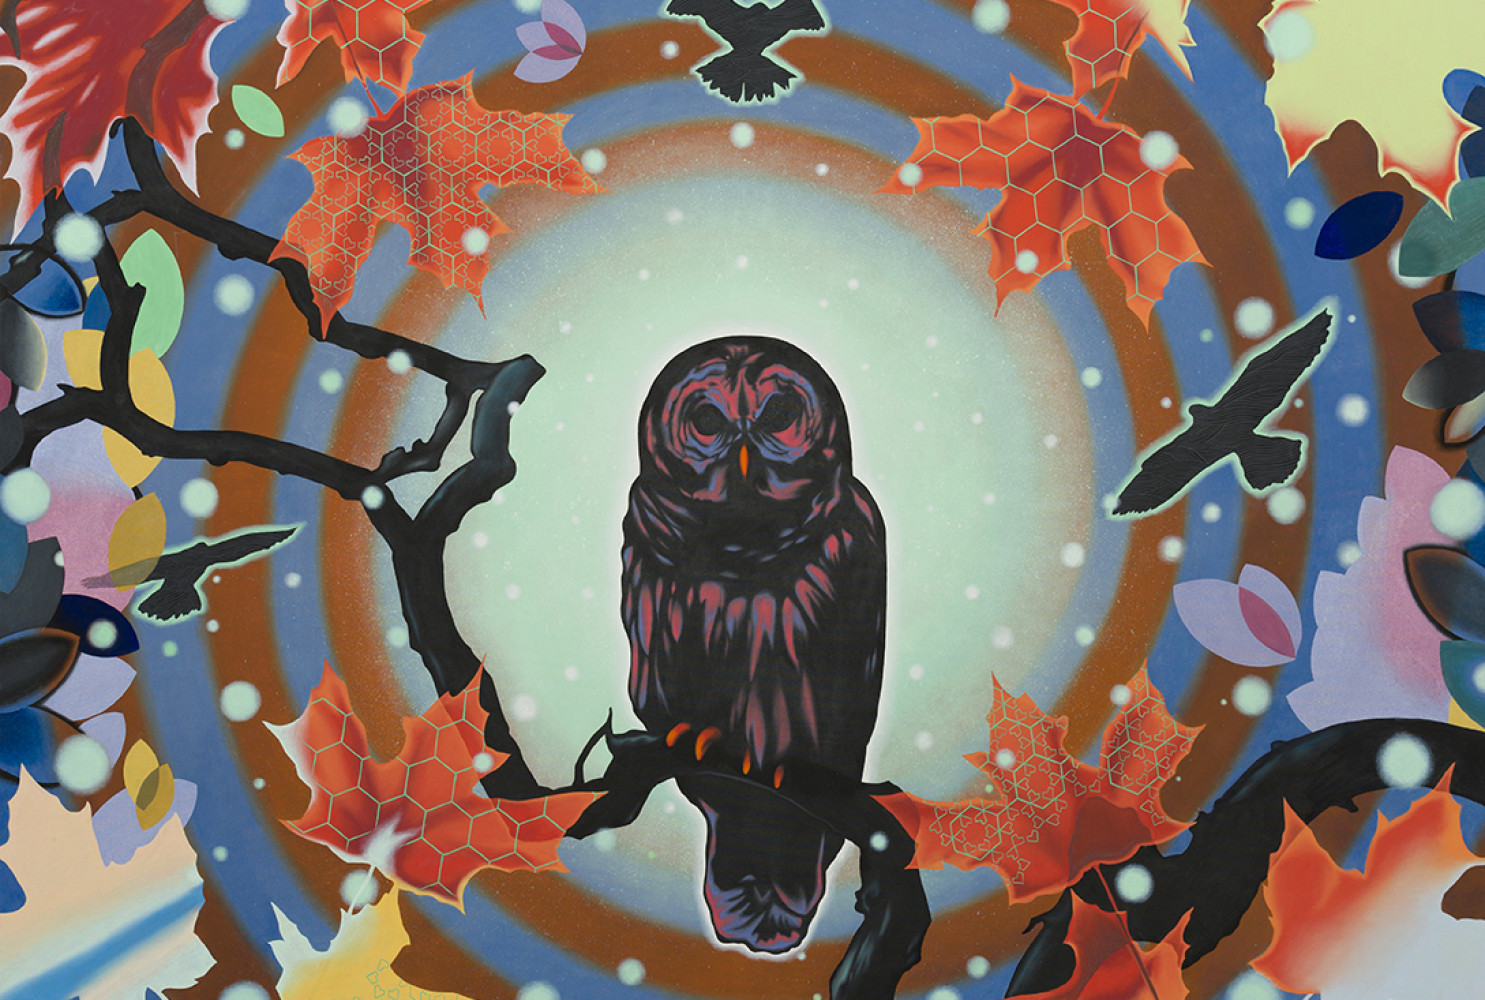 Caravan (Owl), 2012, by Peter Gerakaris (United States, b. 1981). Oil on canvas. 84 x 84 inches. Purchased with funds generously donated by Adrienne and John Mars, National Museum of Wildlife Art. © Peter Gerakaris. M2016.042.